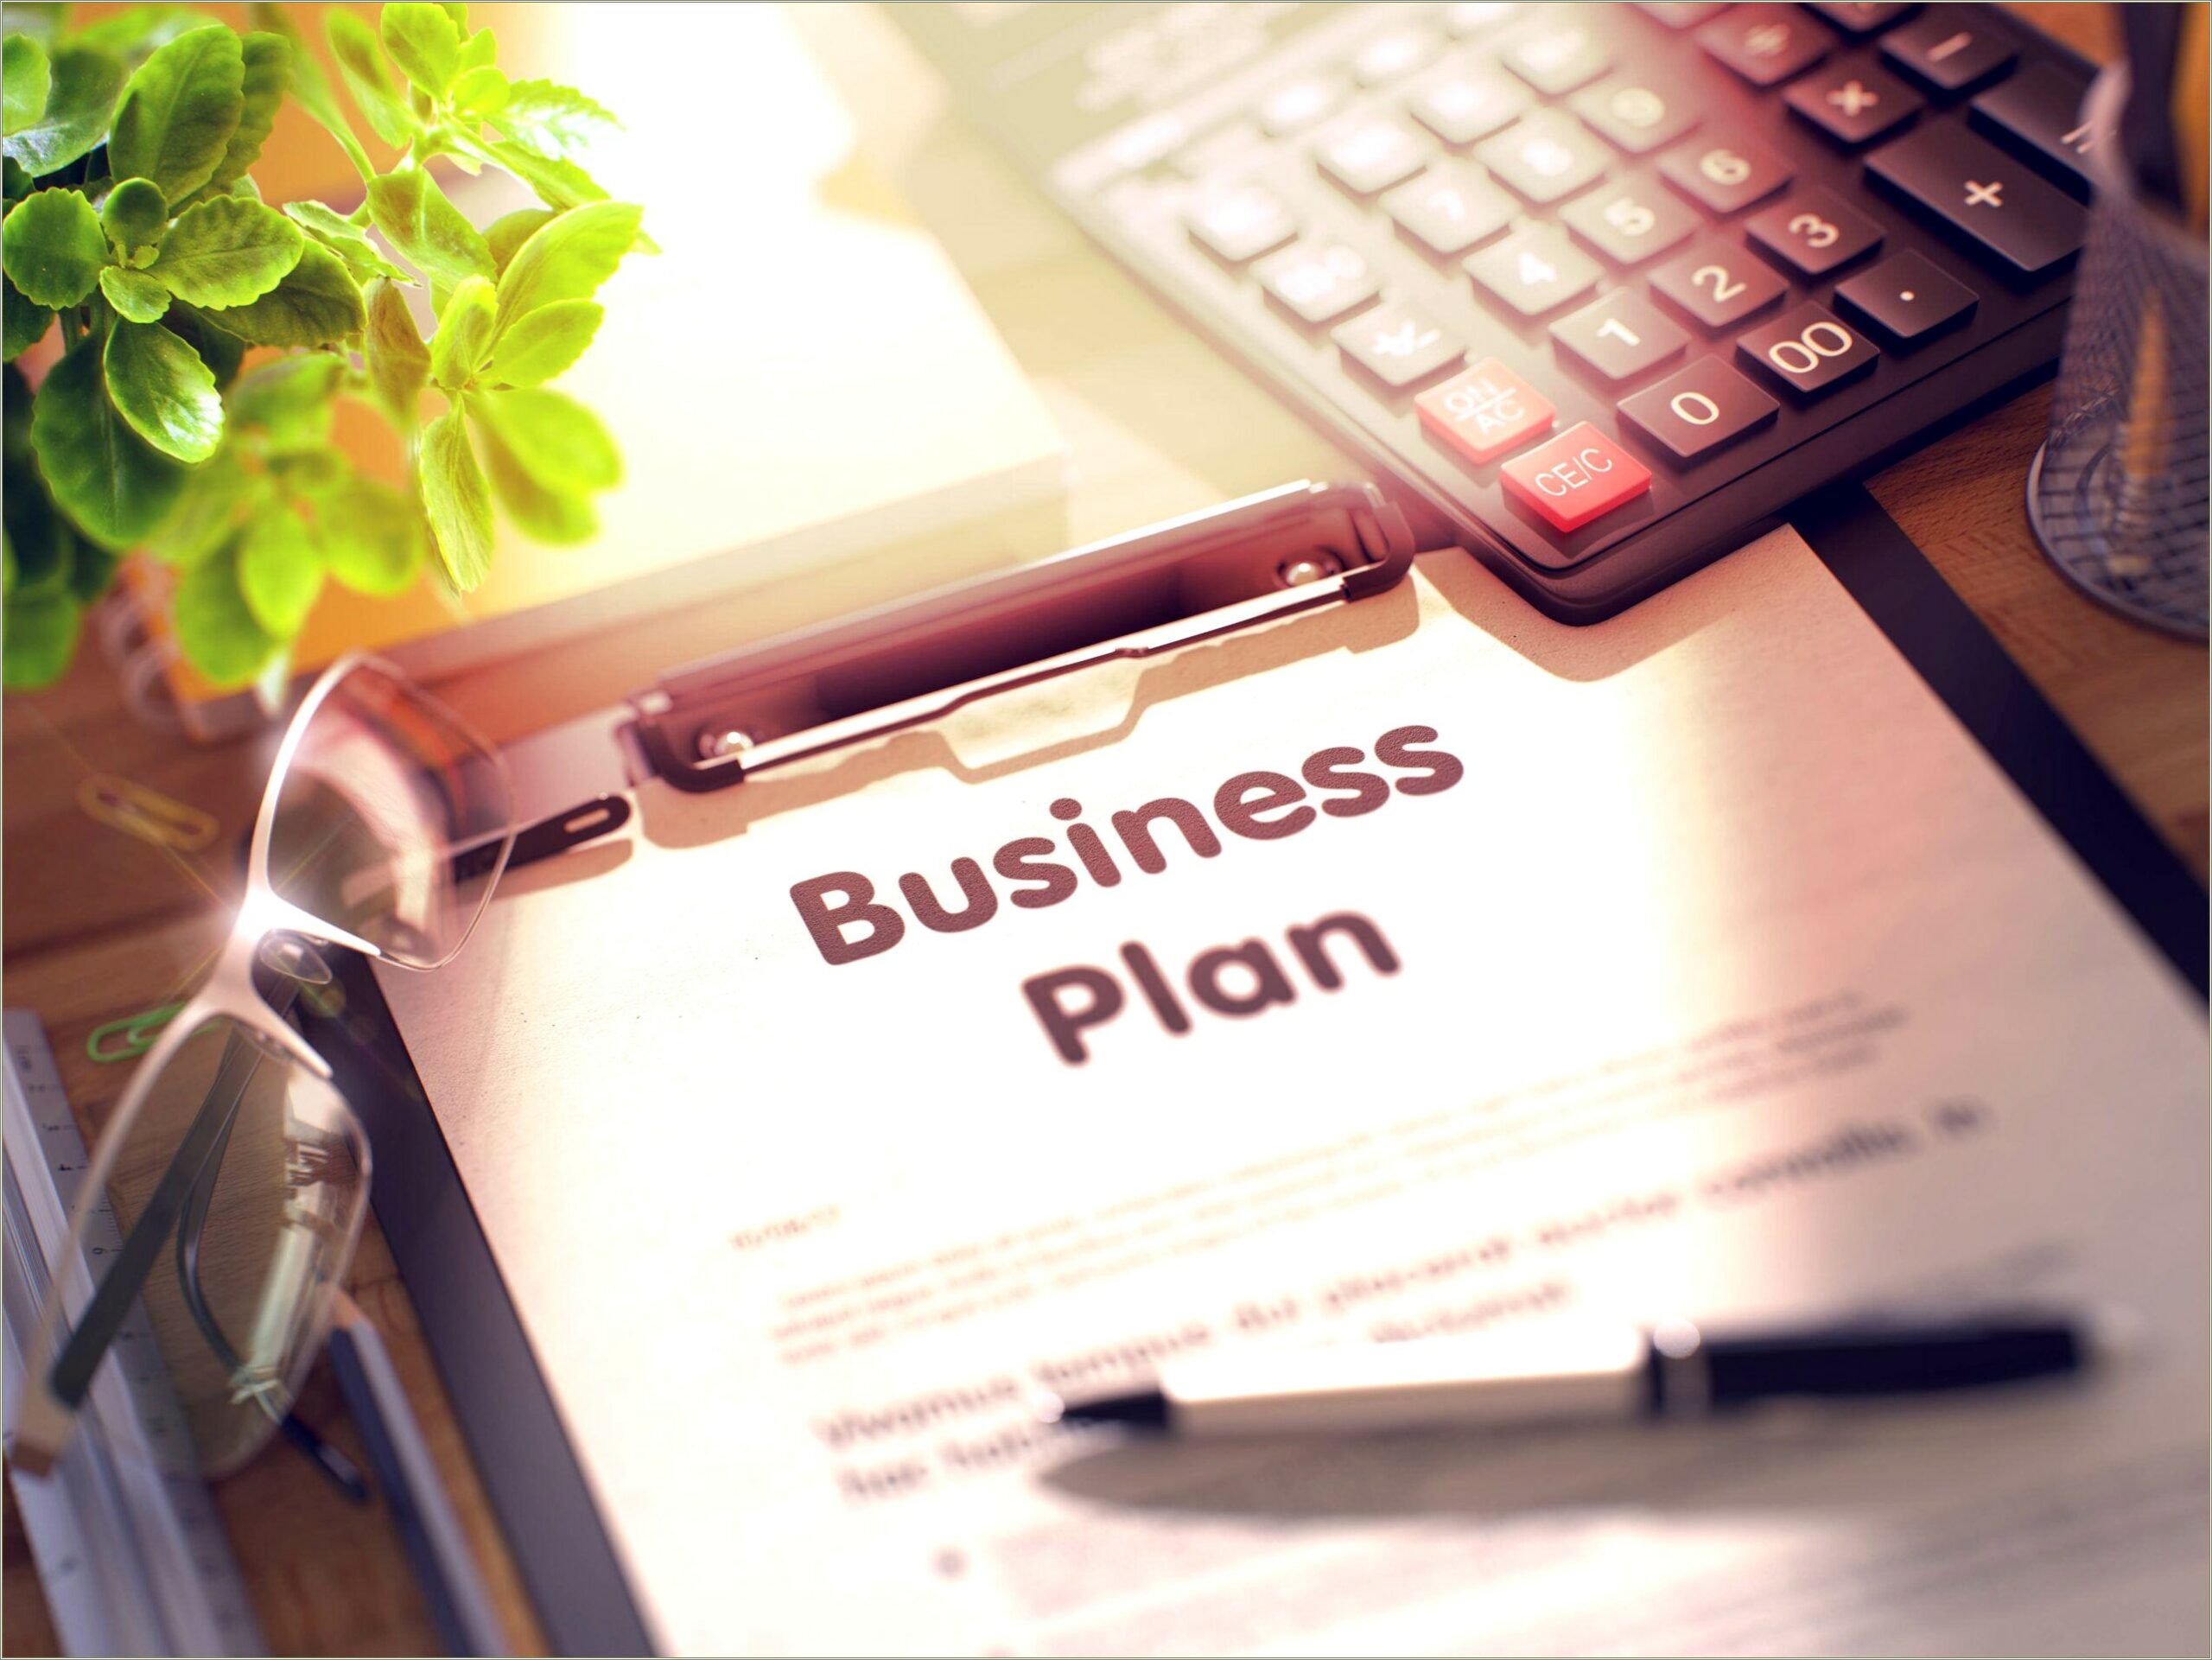 Free Excel Business Plan Template Uk